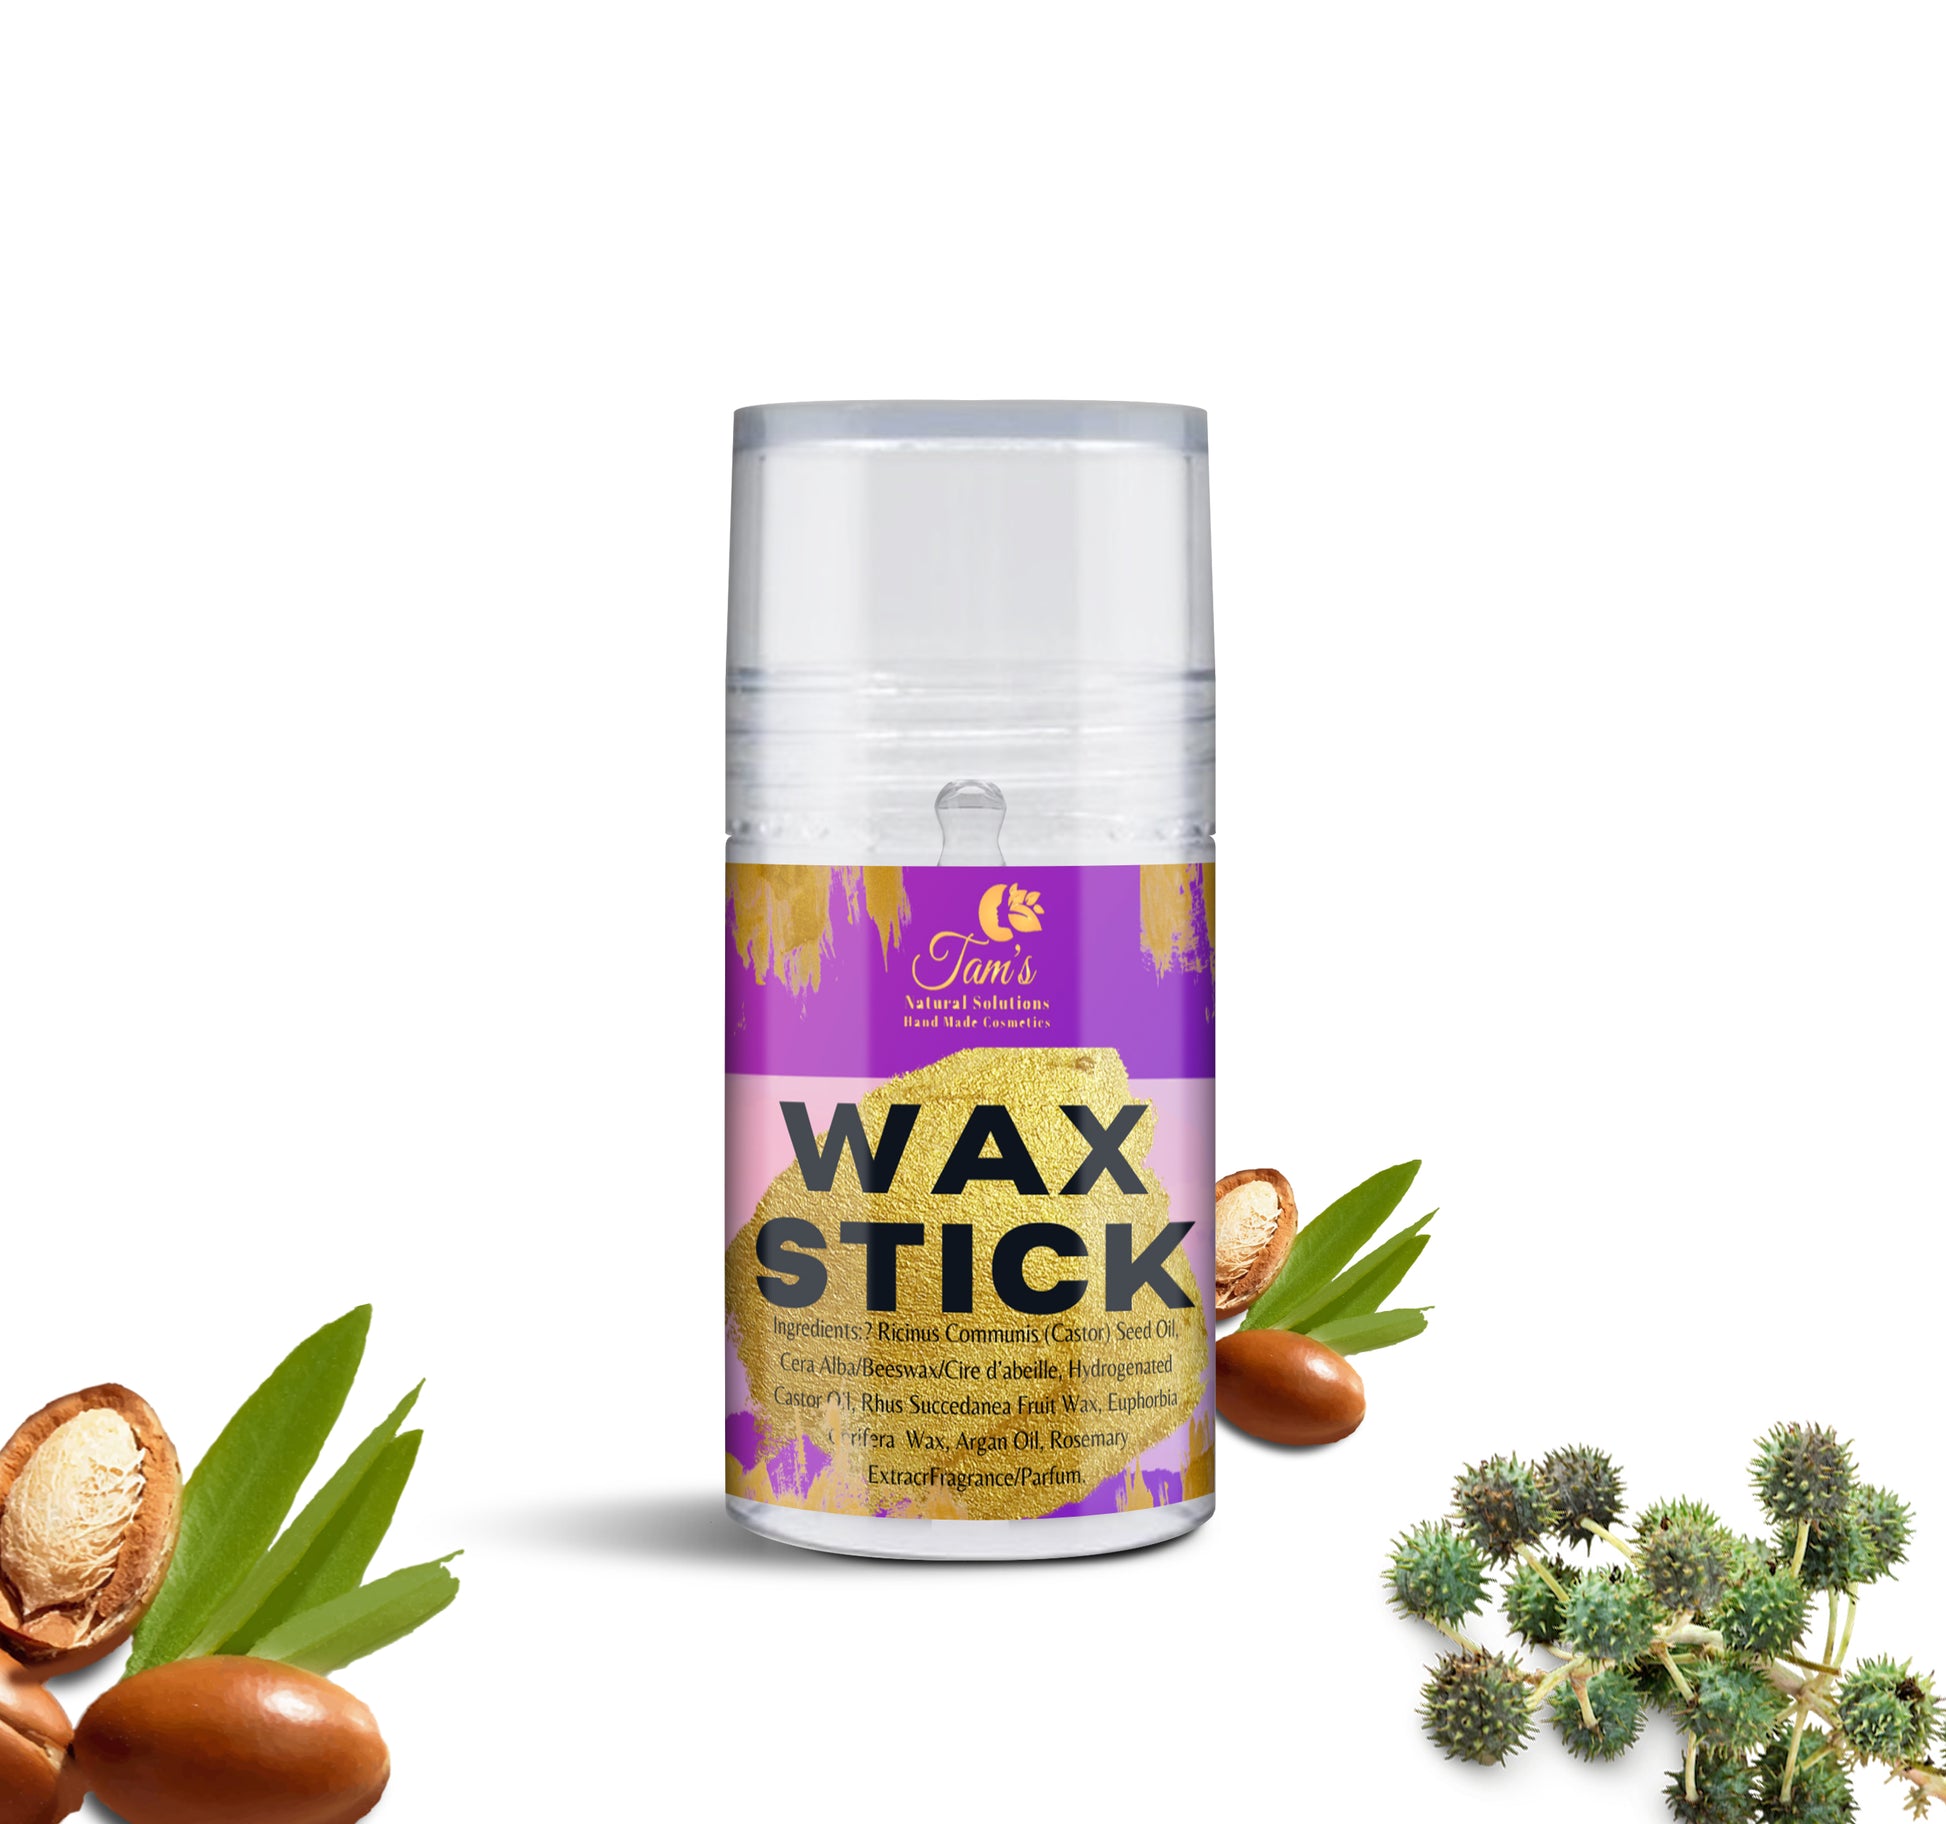 Wax Stick for Styling 2.5 oz - Tam's Natural Solutions